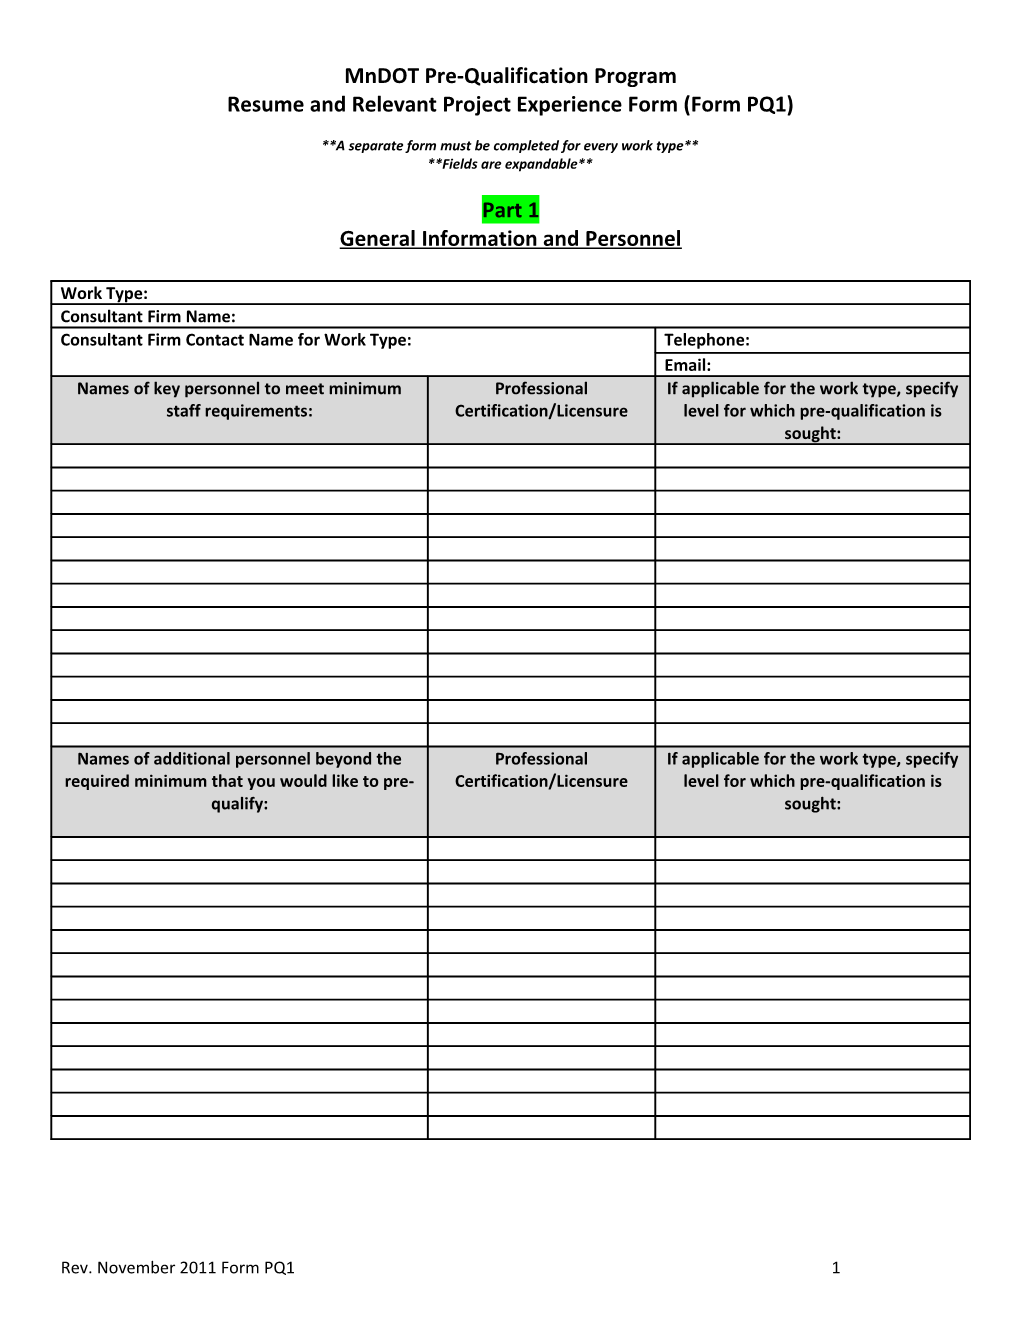 Resume and Relevant Project Experience Form (Form PQ1)